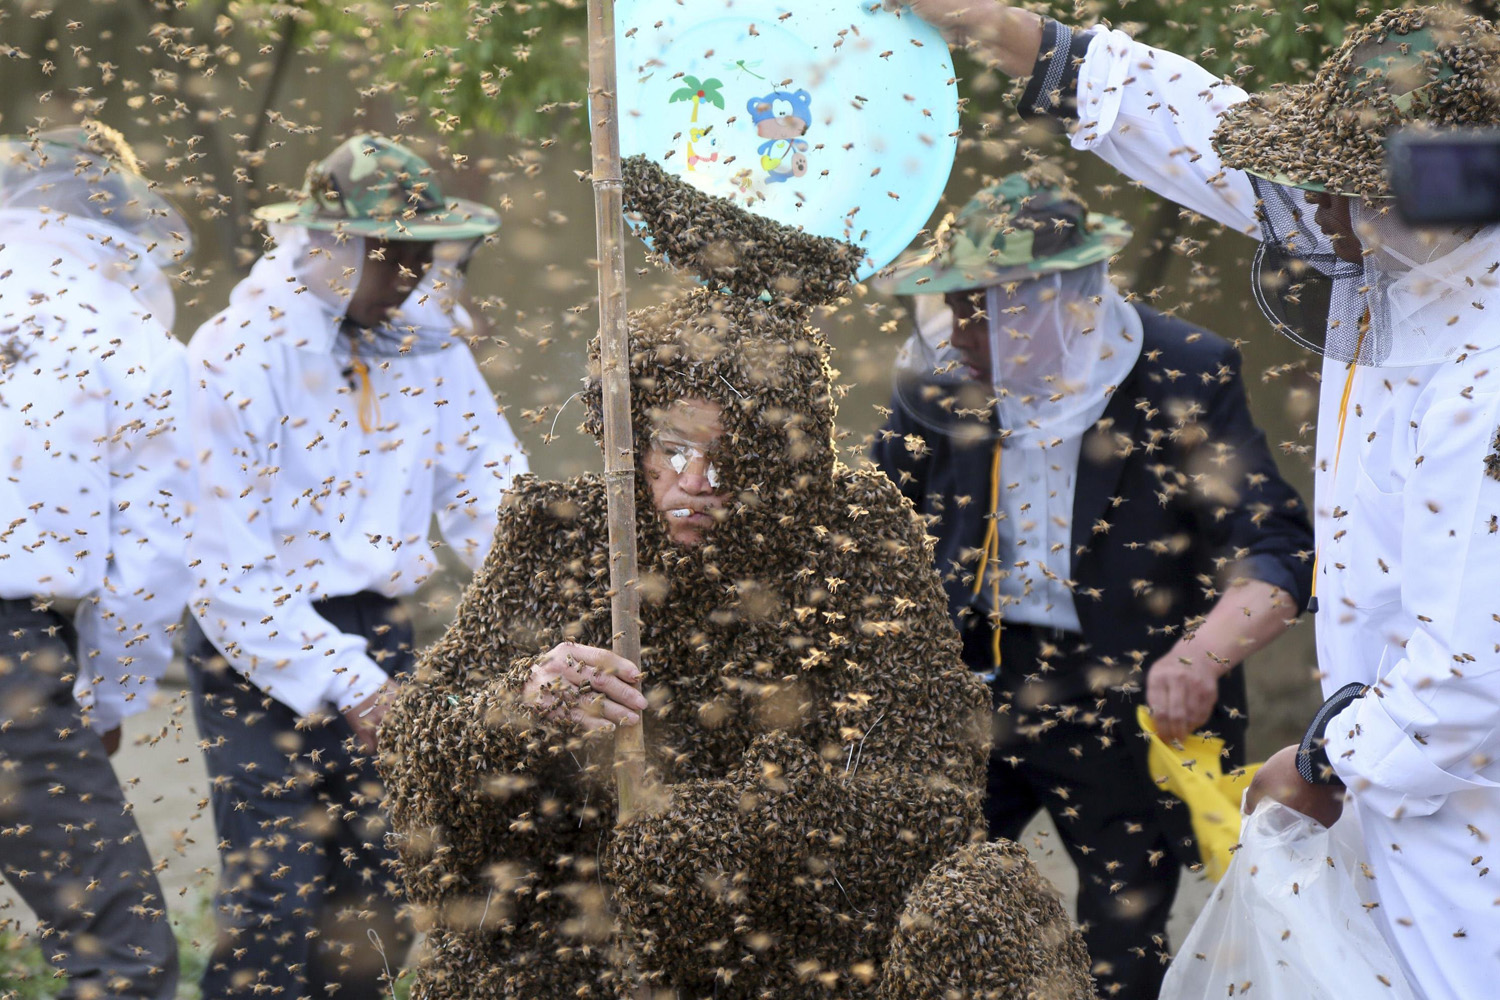 Gao Bingguo is covered with bees during an attempt to break the Guinness World Record for being covered by the largest number of bees, in Taian, Shandong province, China on May 27, 2014.